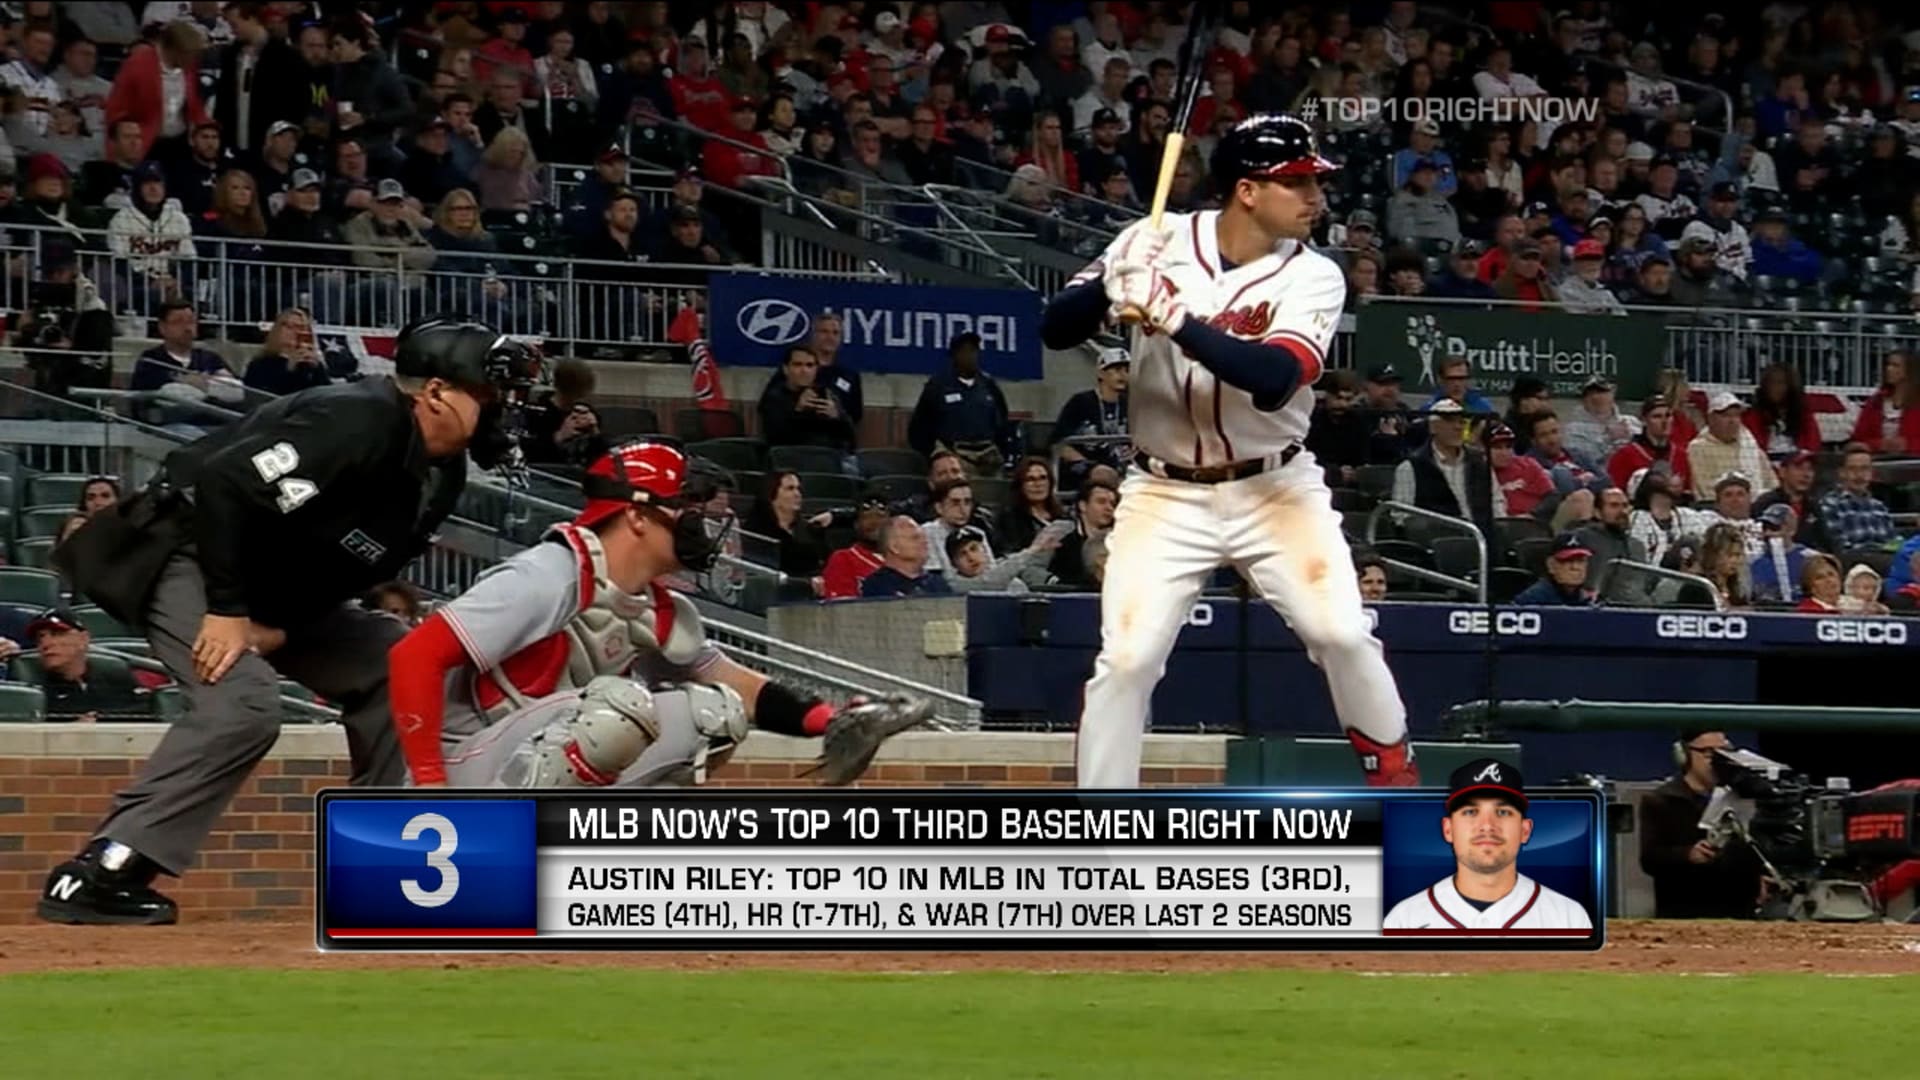 MLB Network - Thoughts on MLB Now's top 10 third basemen???